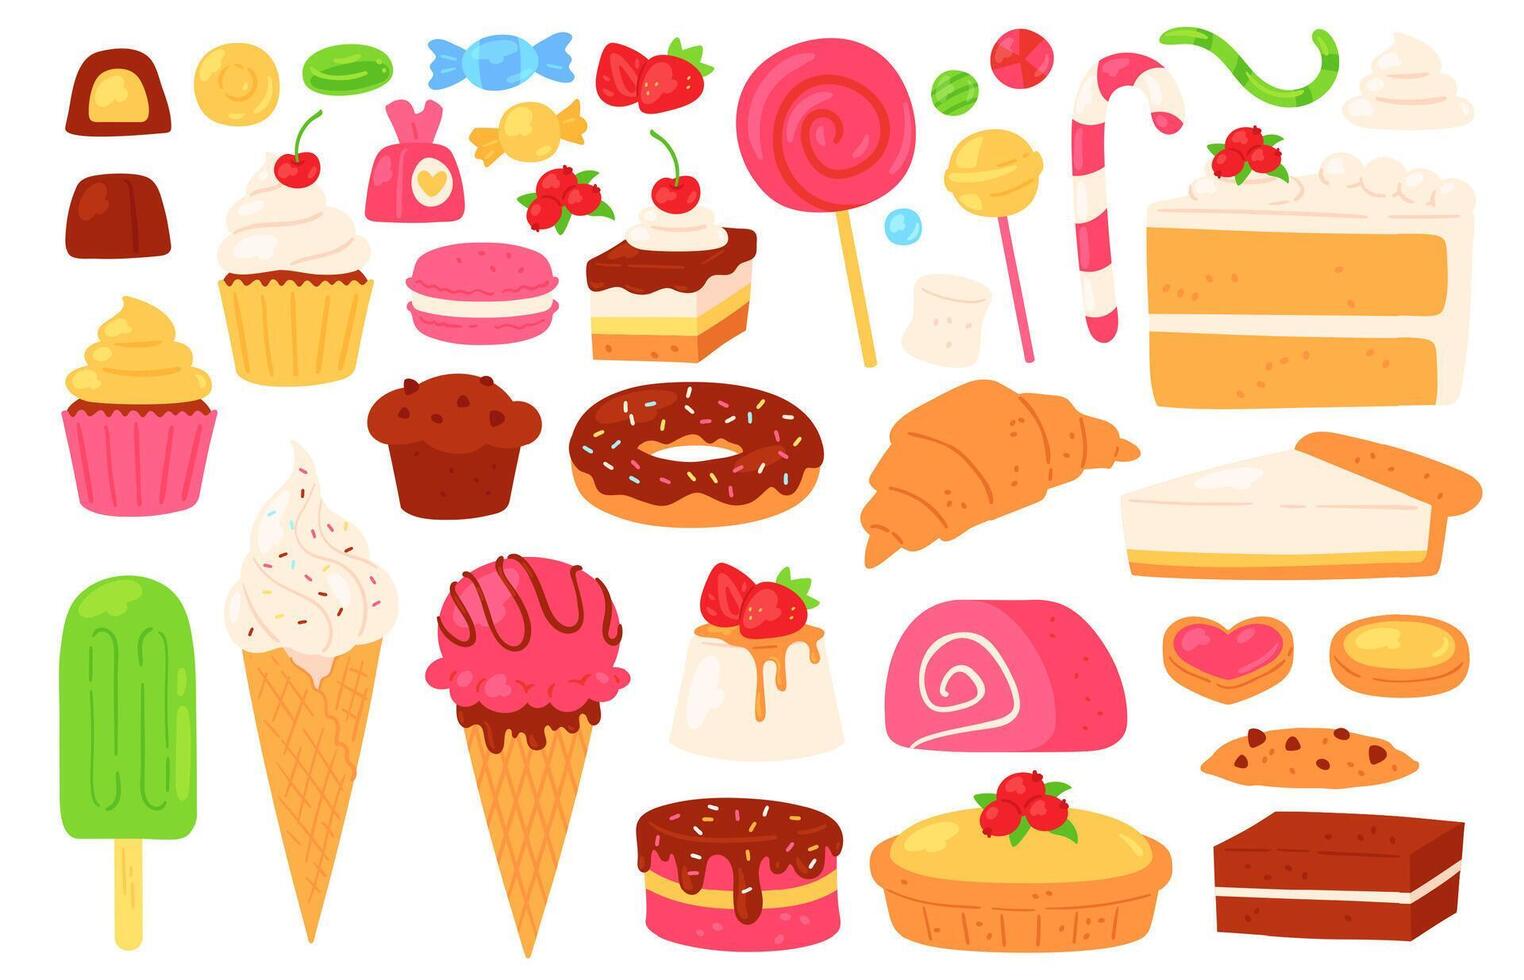 Cartoon candy and sweets. Cupcakes, ice cream, lollipops, chocolate and jelly candies, biscuit pastries and cakes. Confectionery vector set